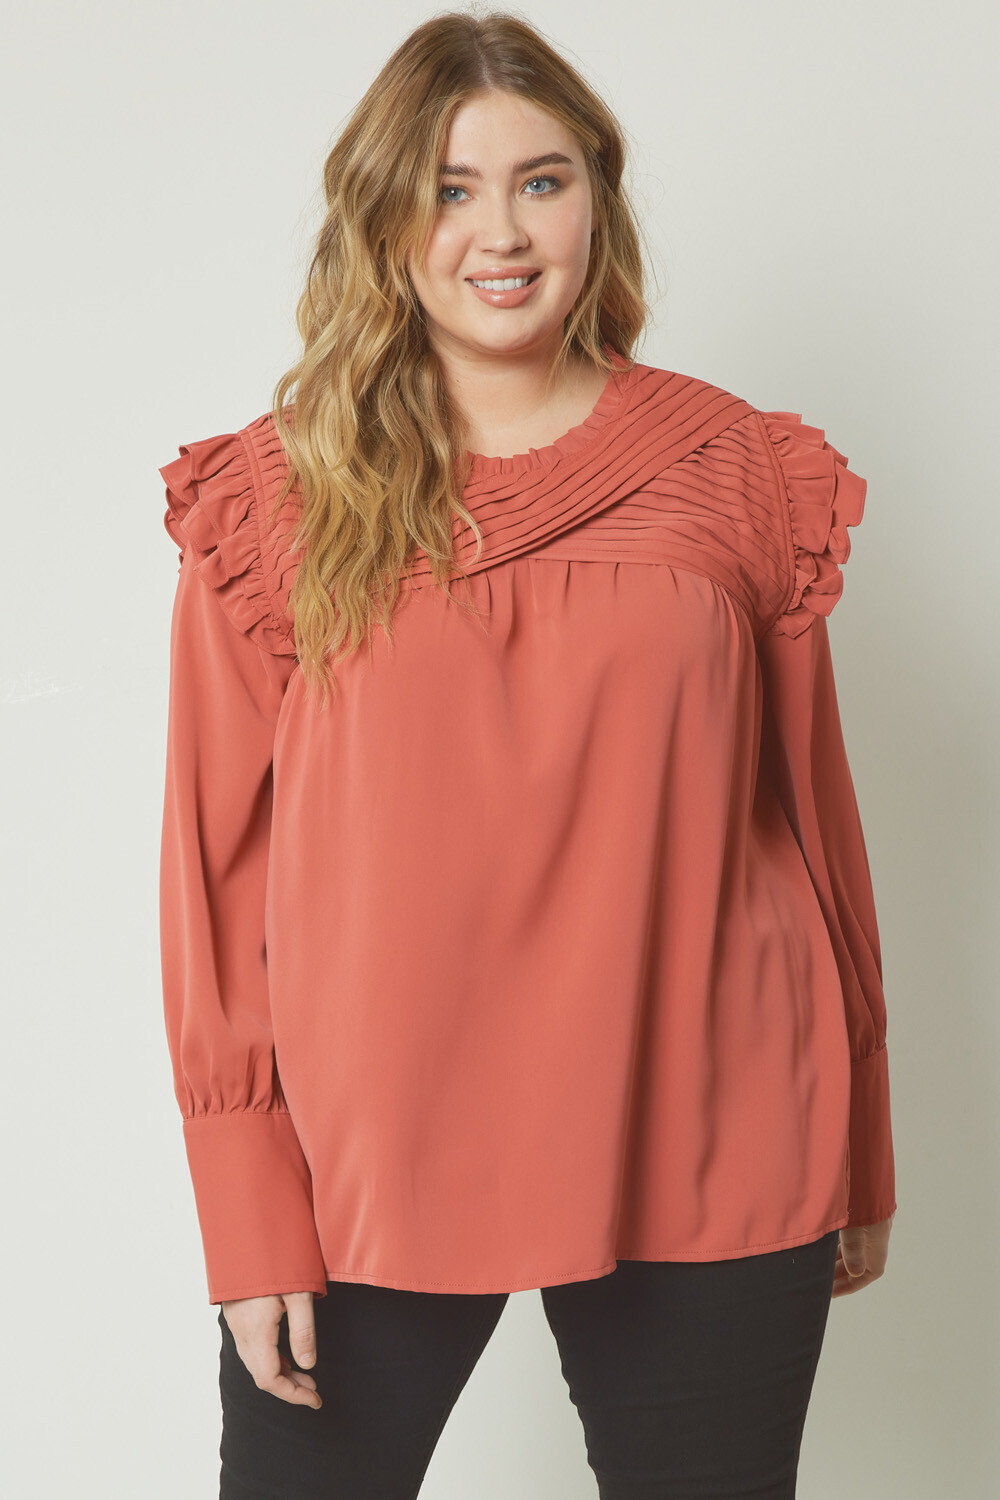 How It Started L/S Top, CURVY